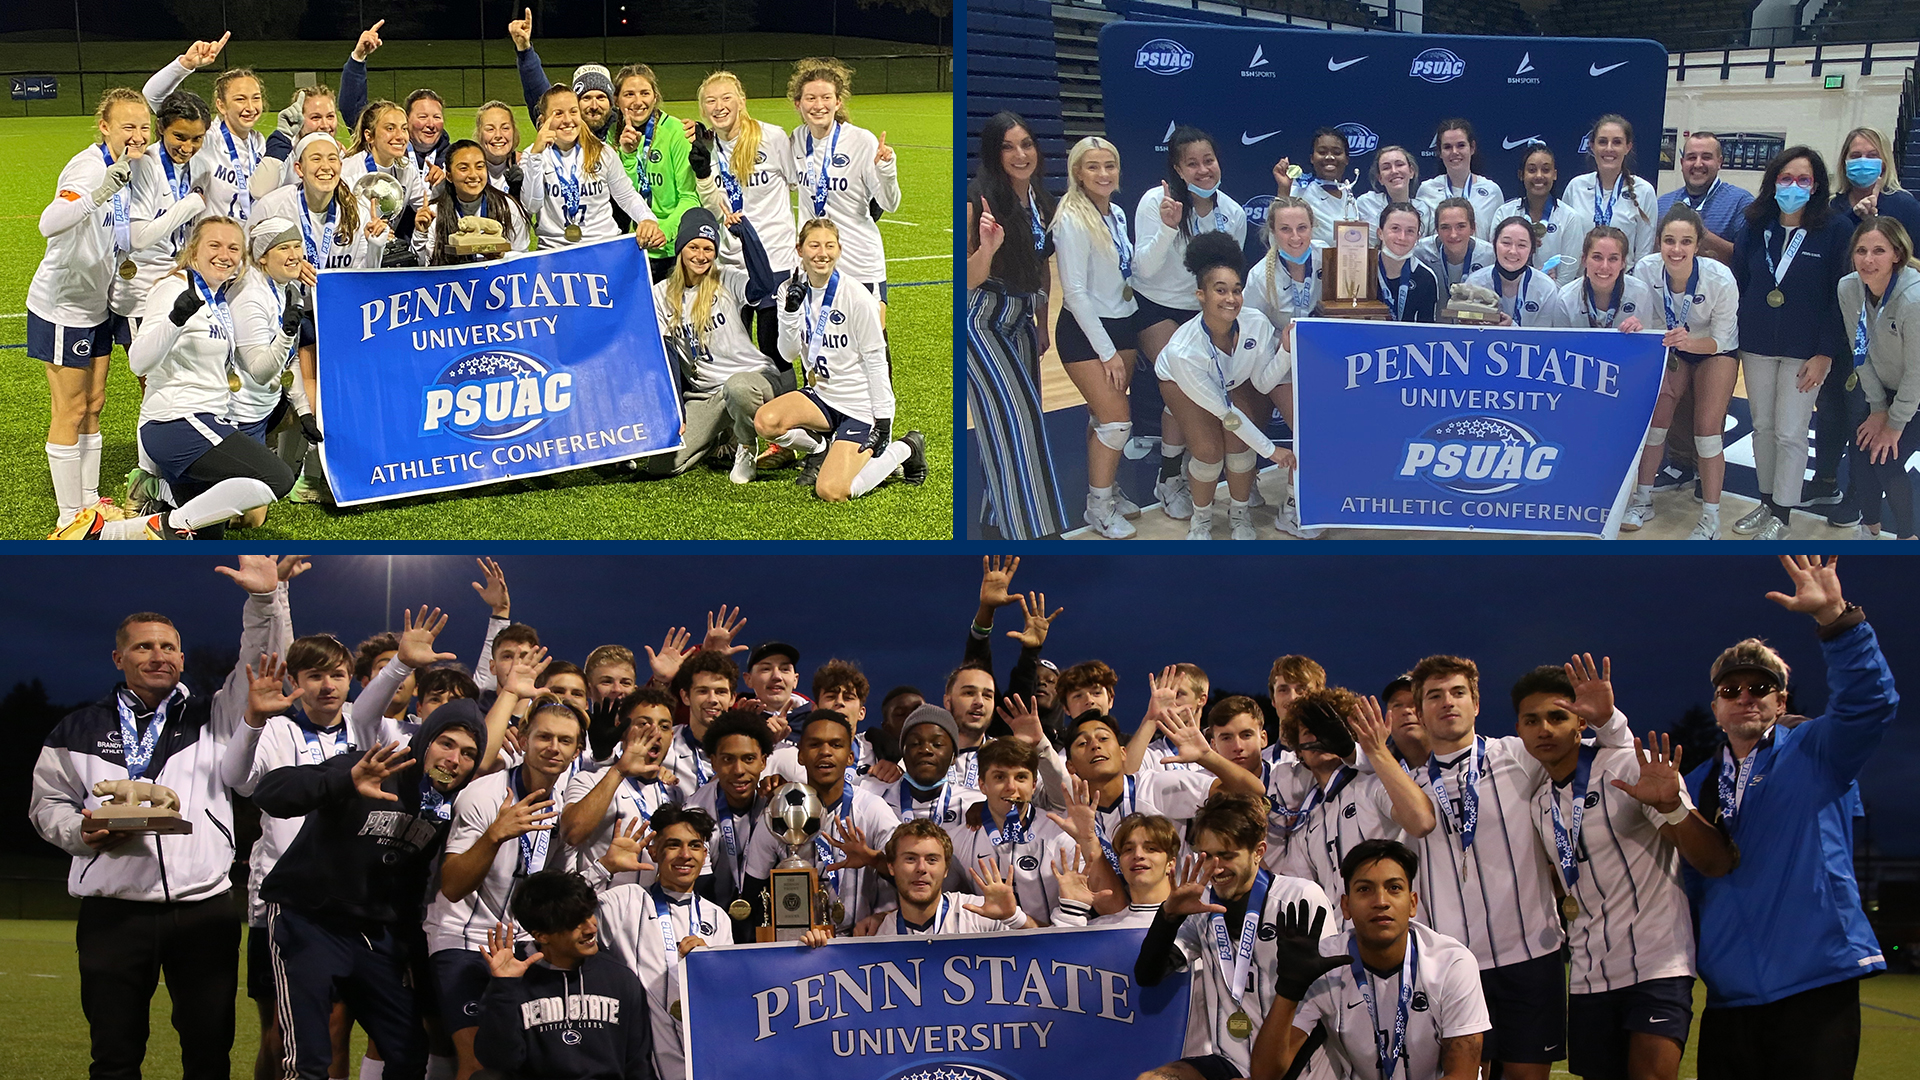 Pictured, listed clockwise from top left, the 2021 PSUAC Champions: PSUAC Women's Soccer Champions Penn State Mont Alto; PSUAC Volleyball Champions Penn State Greater Allegheny; PSUAC Men's Soccer Champions Penn State Brandywine.